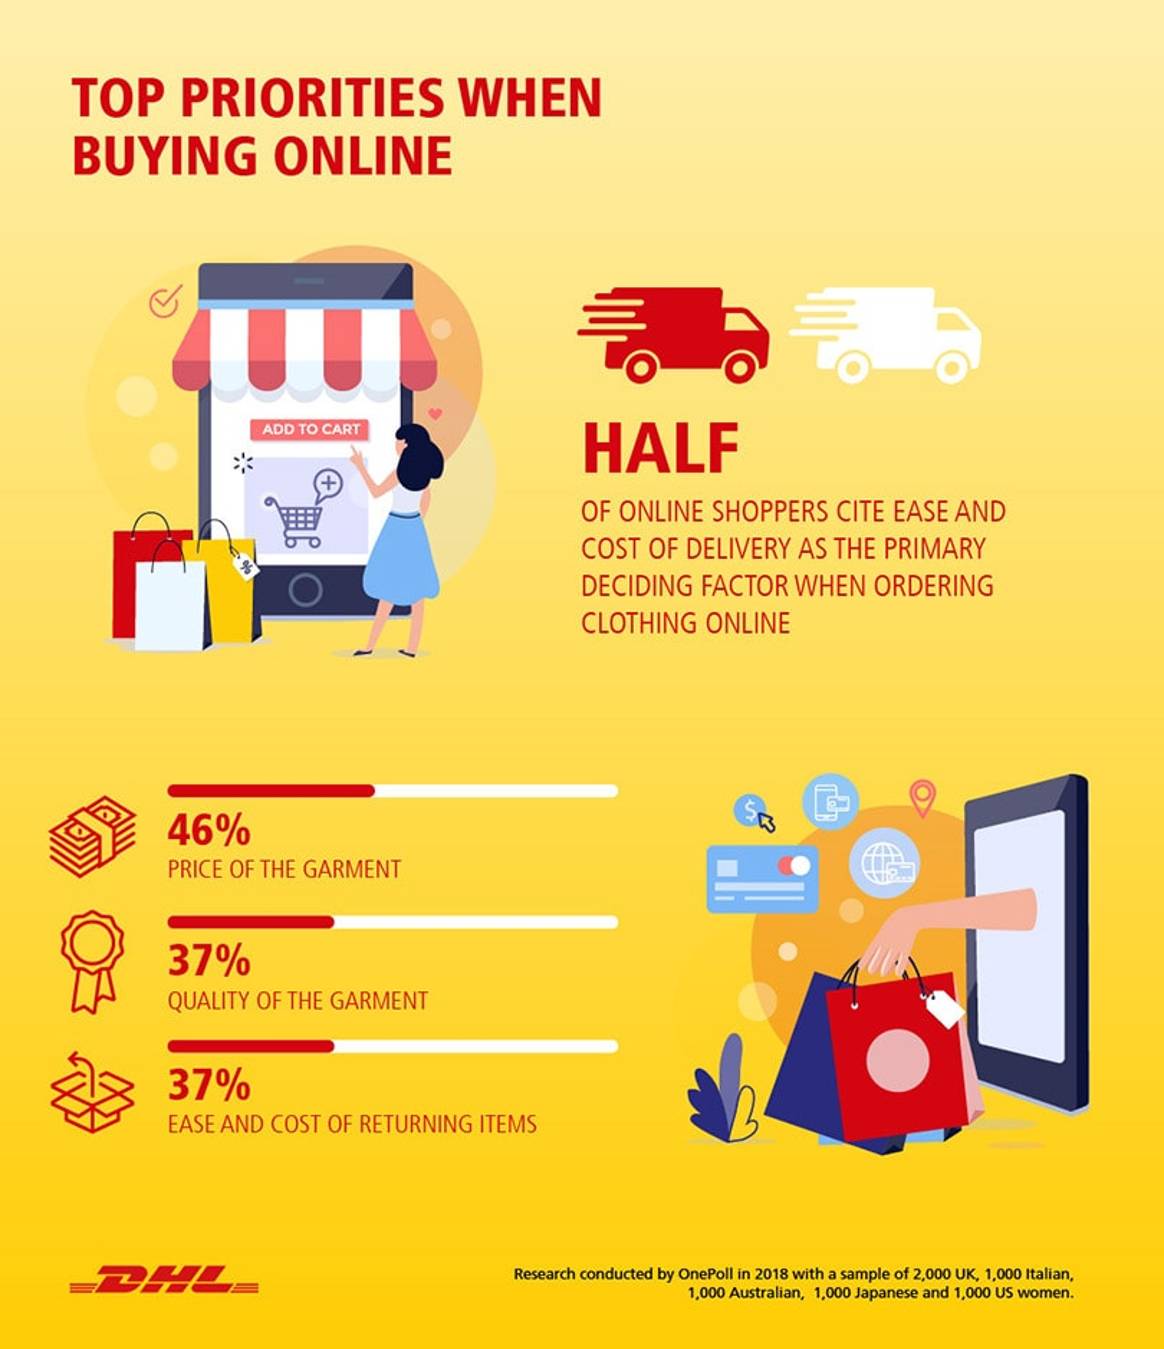 Online shopping: ease and cost of delivery more important than garment’s price